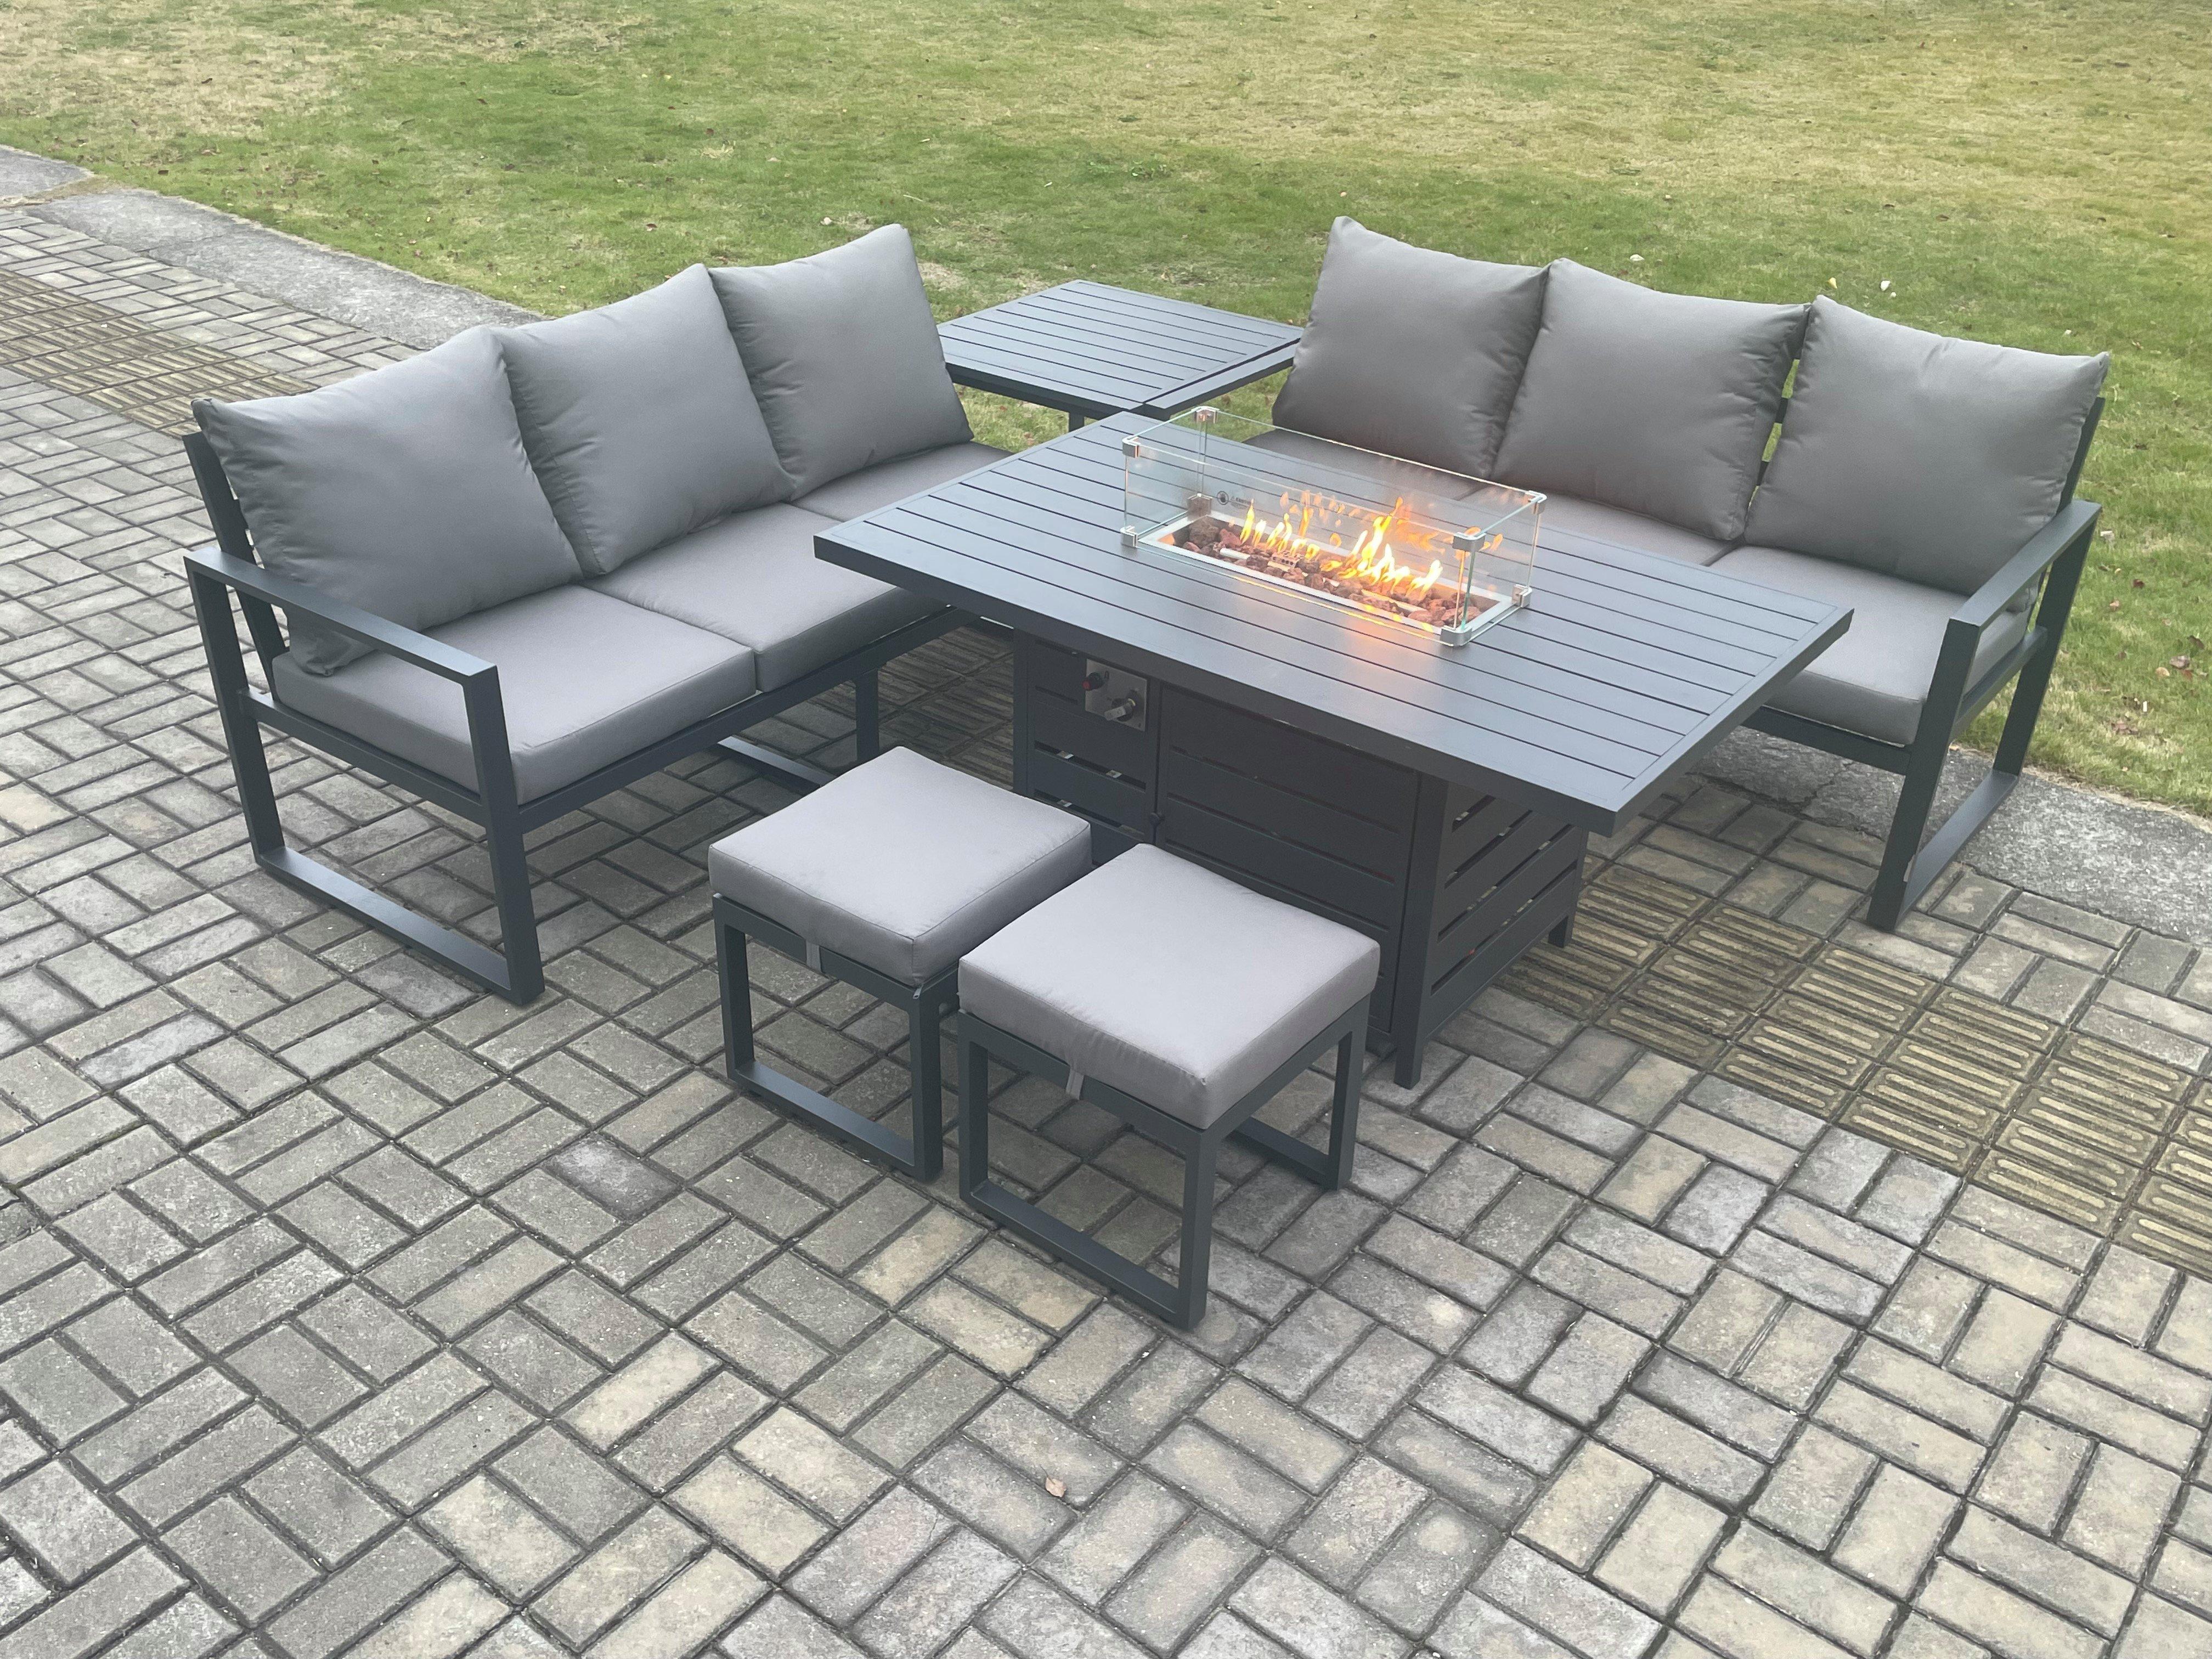 Aluminium 8 Seater Outdoor Garden Furniture Lounge Sofa Set Gas Fire Pit Dining Table with 2 Small F